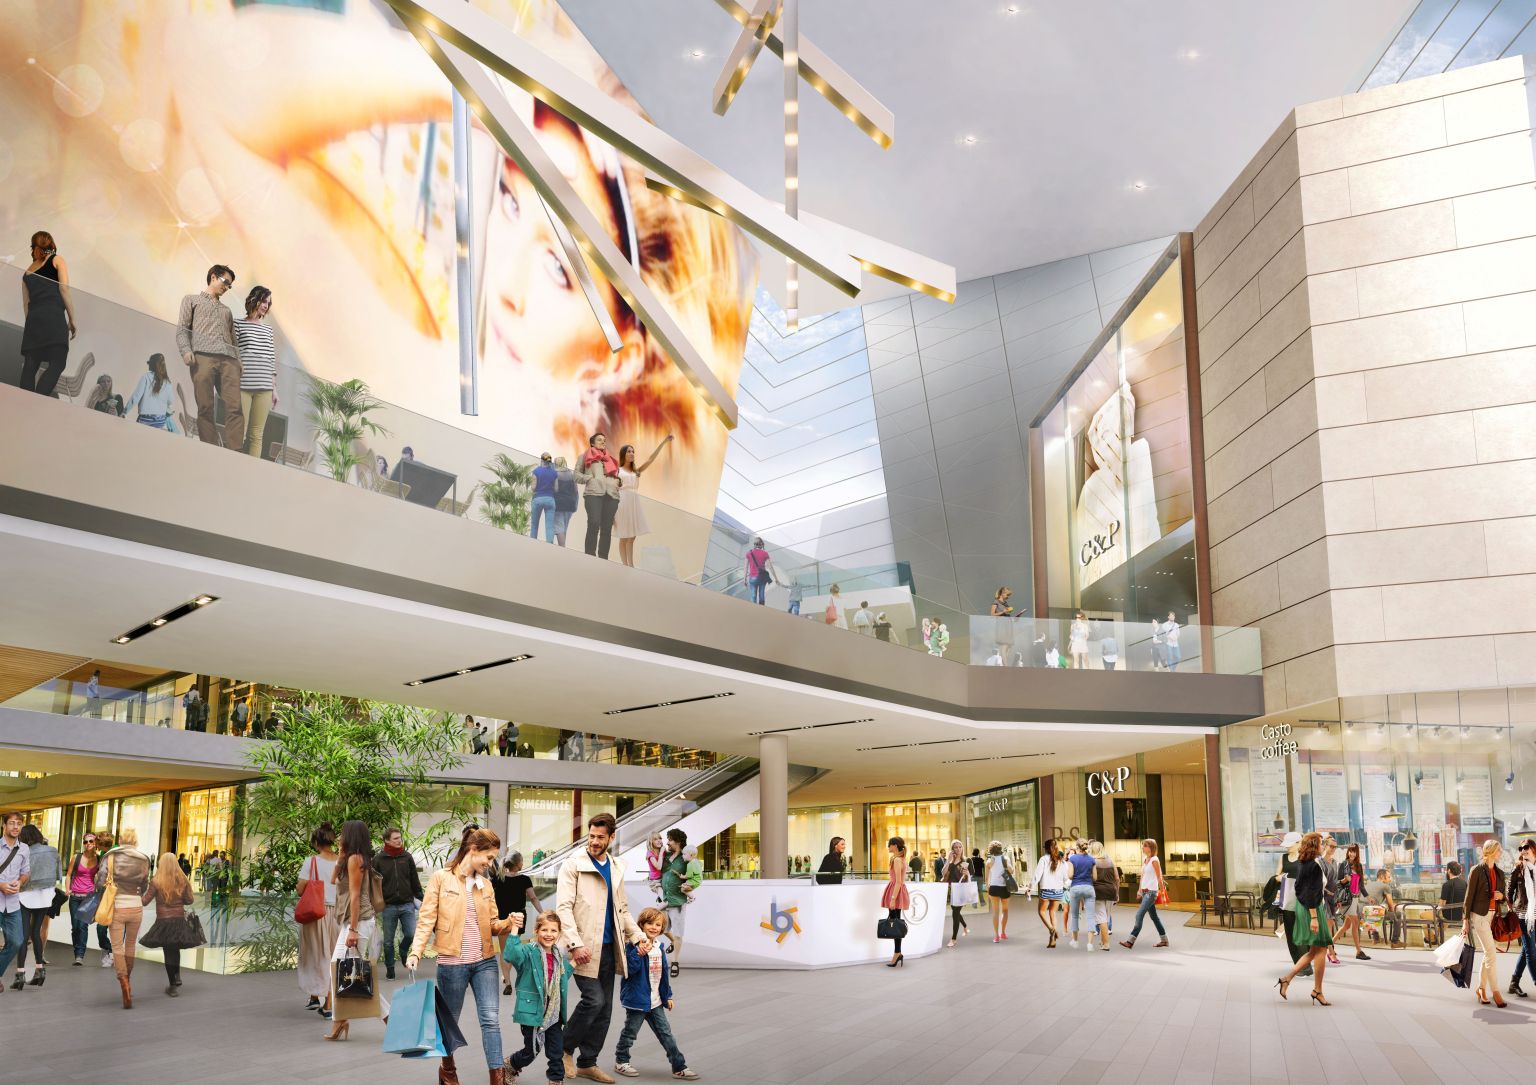 ECE plant neues Shopping-Center in Budapest